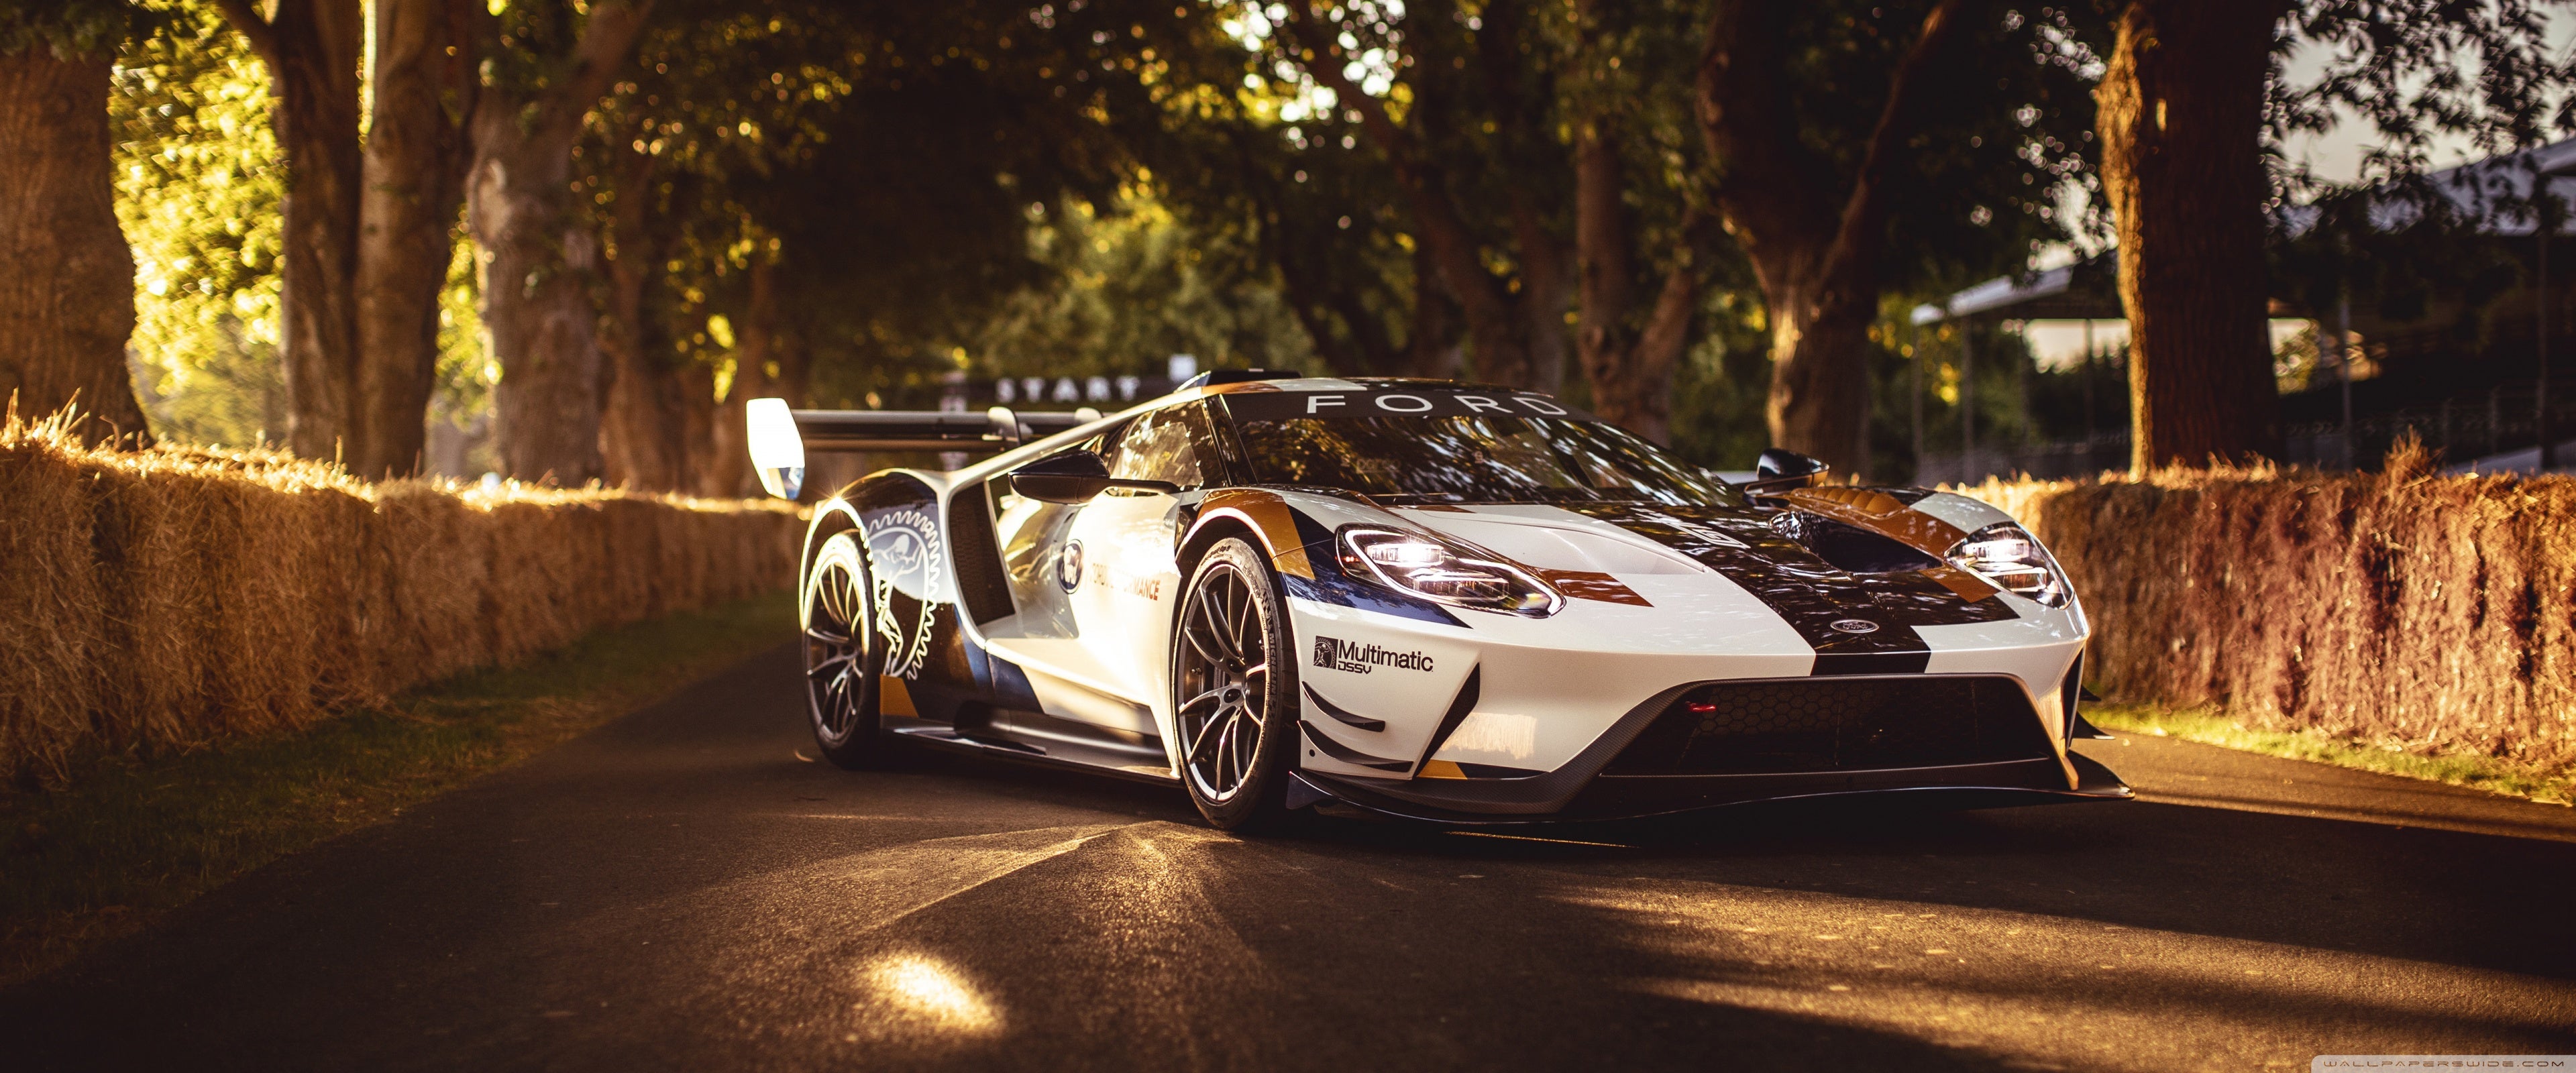 Ford 4k Wallpapers For Your Desktop Or Mobile Screen Free And Easy To Download